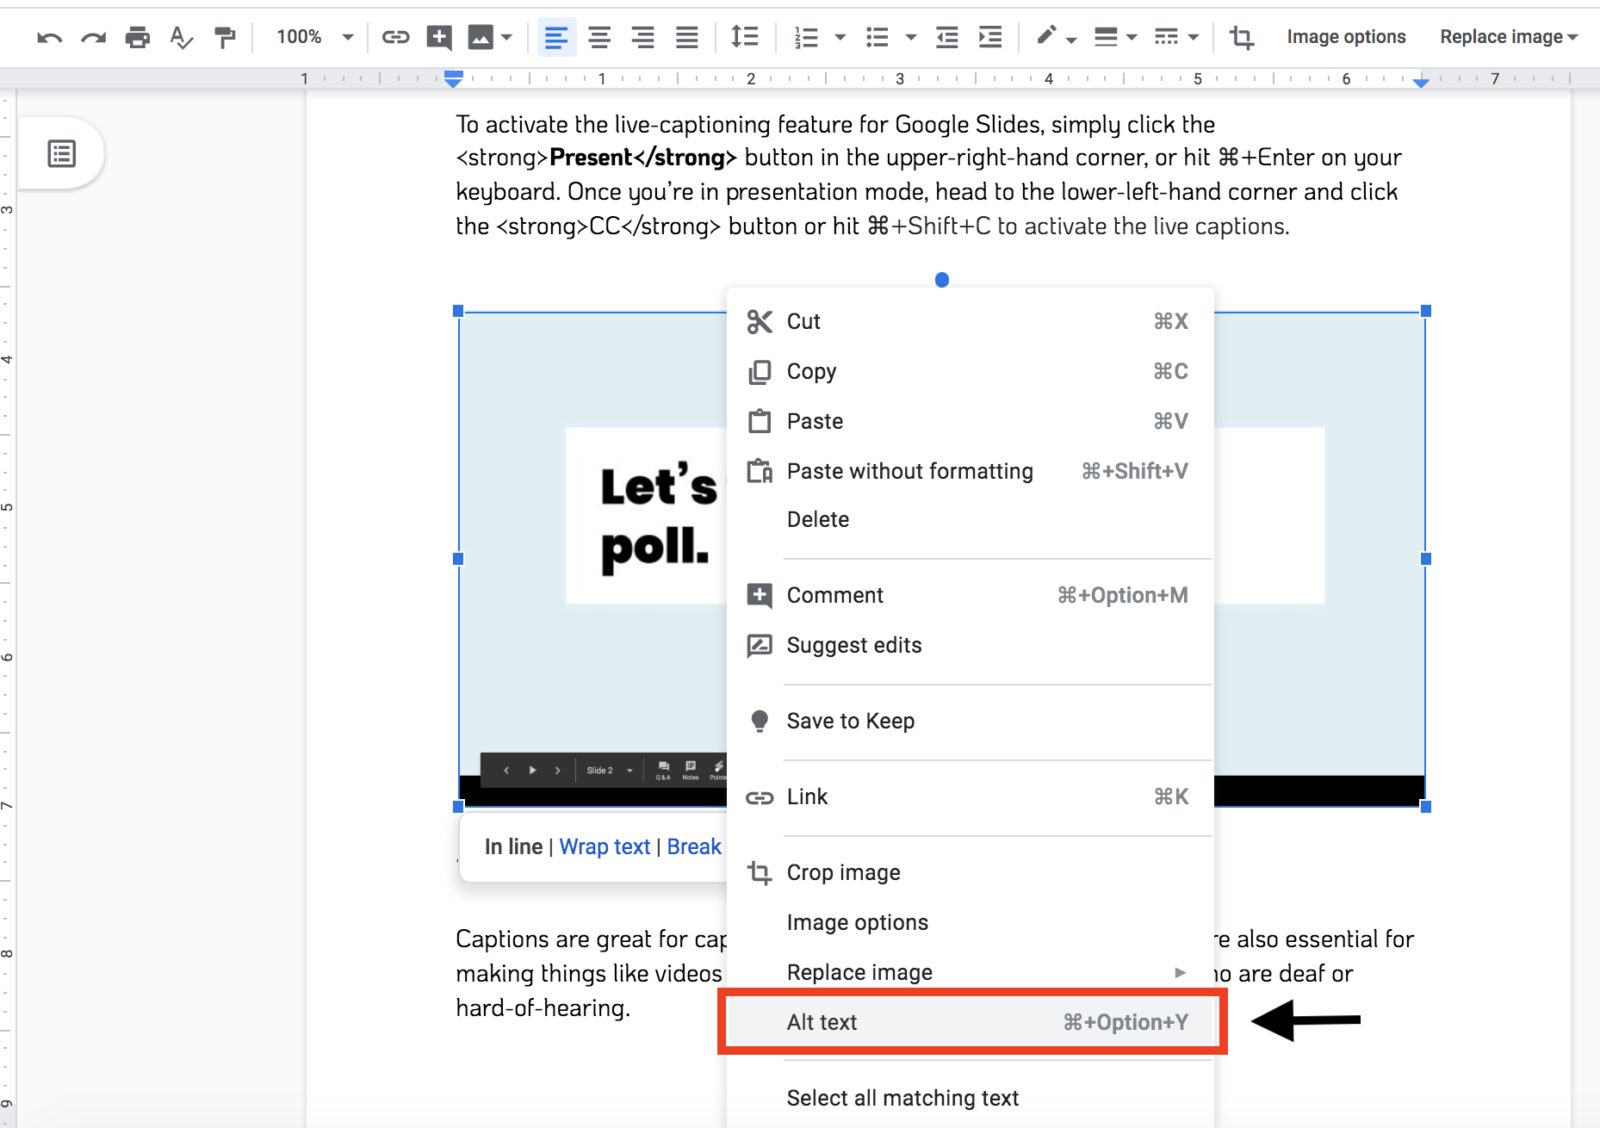 Right click on images in Google Docs and select "alt text" at the bottom of the menu